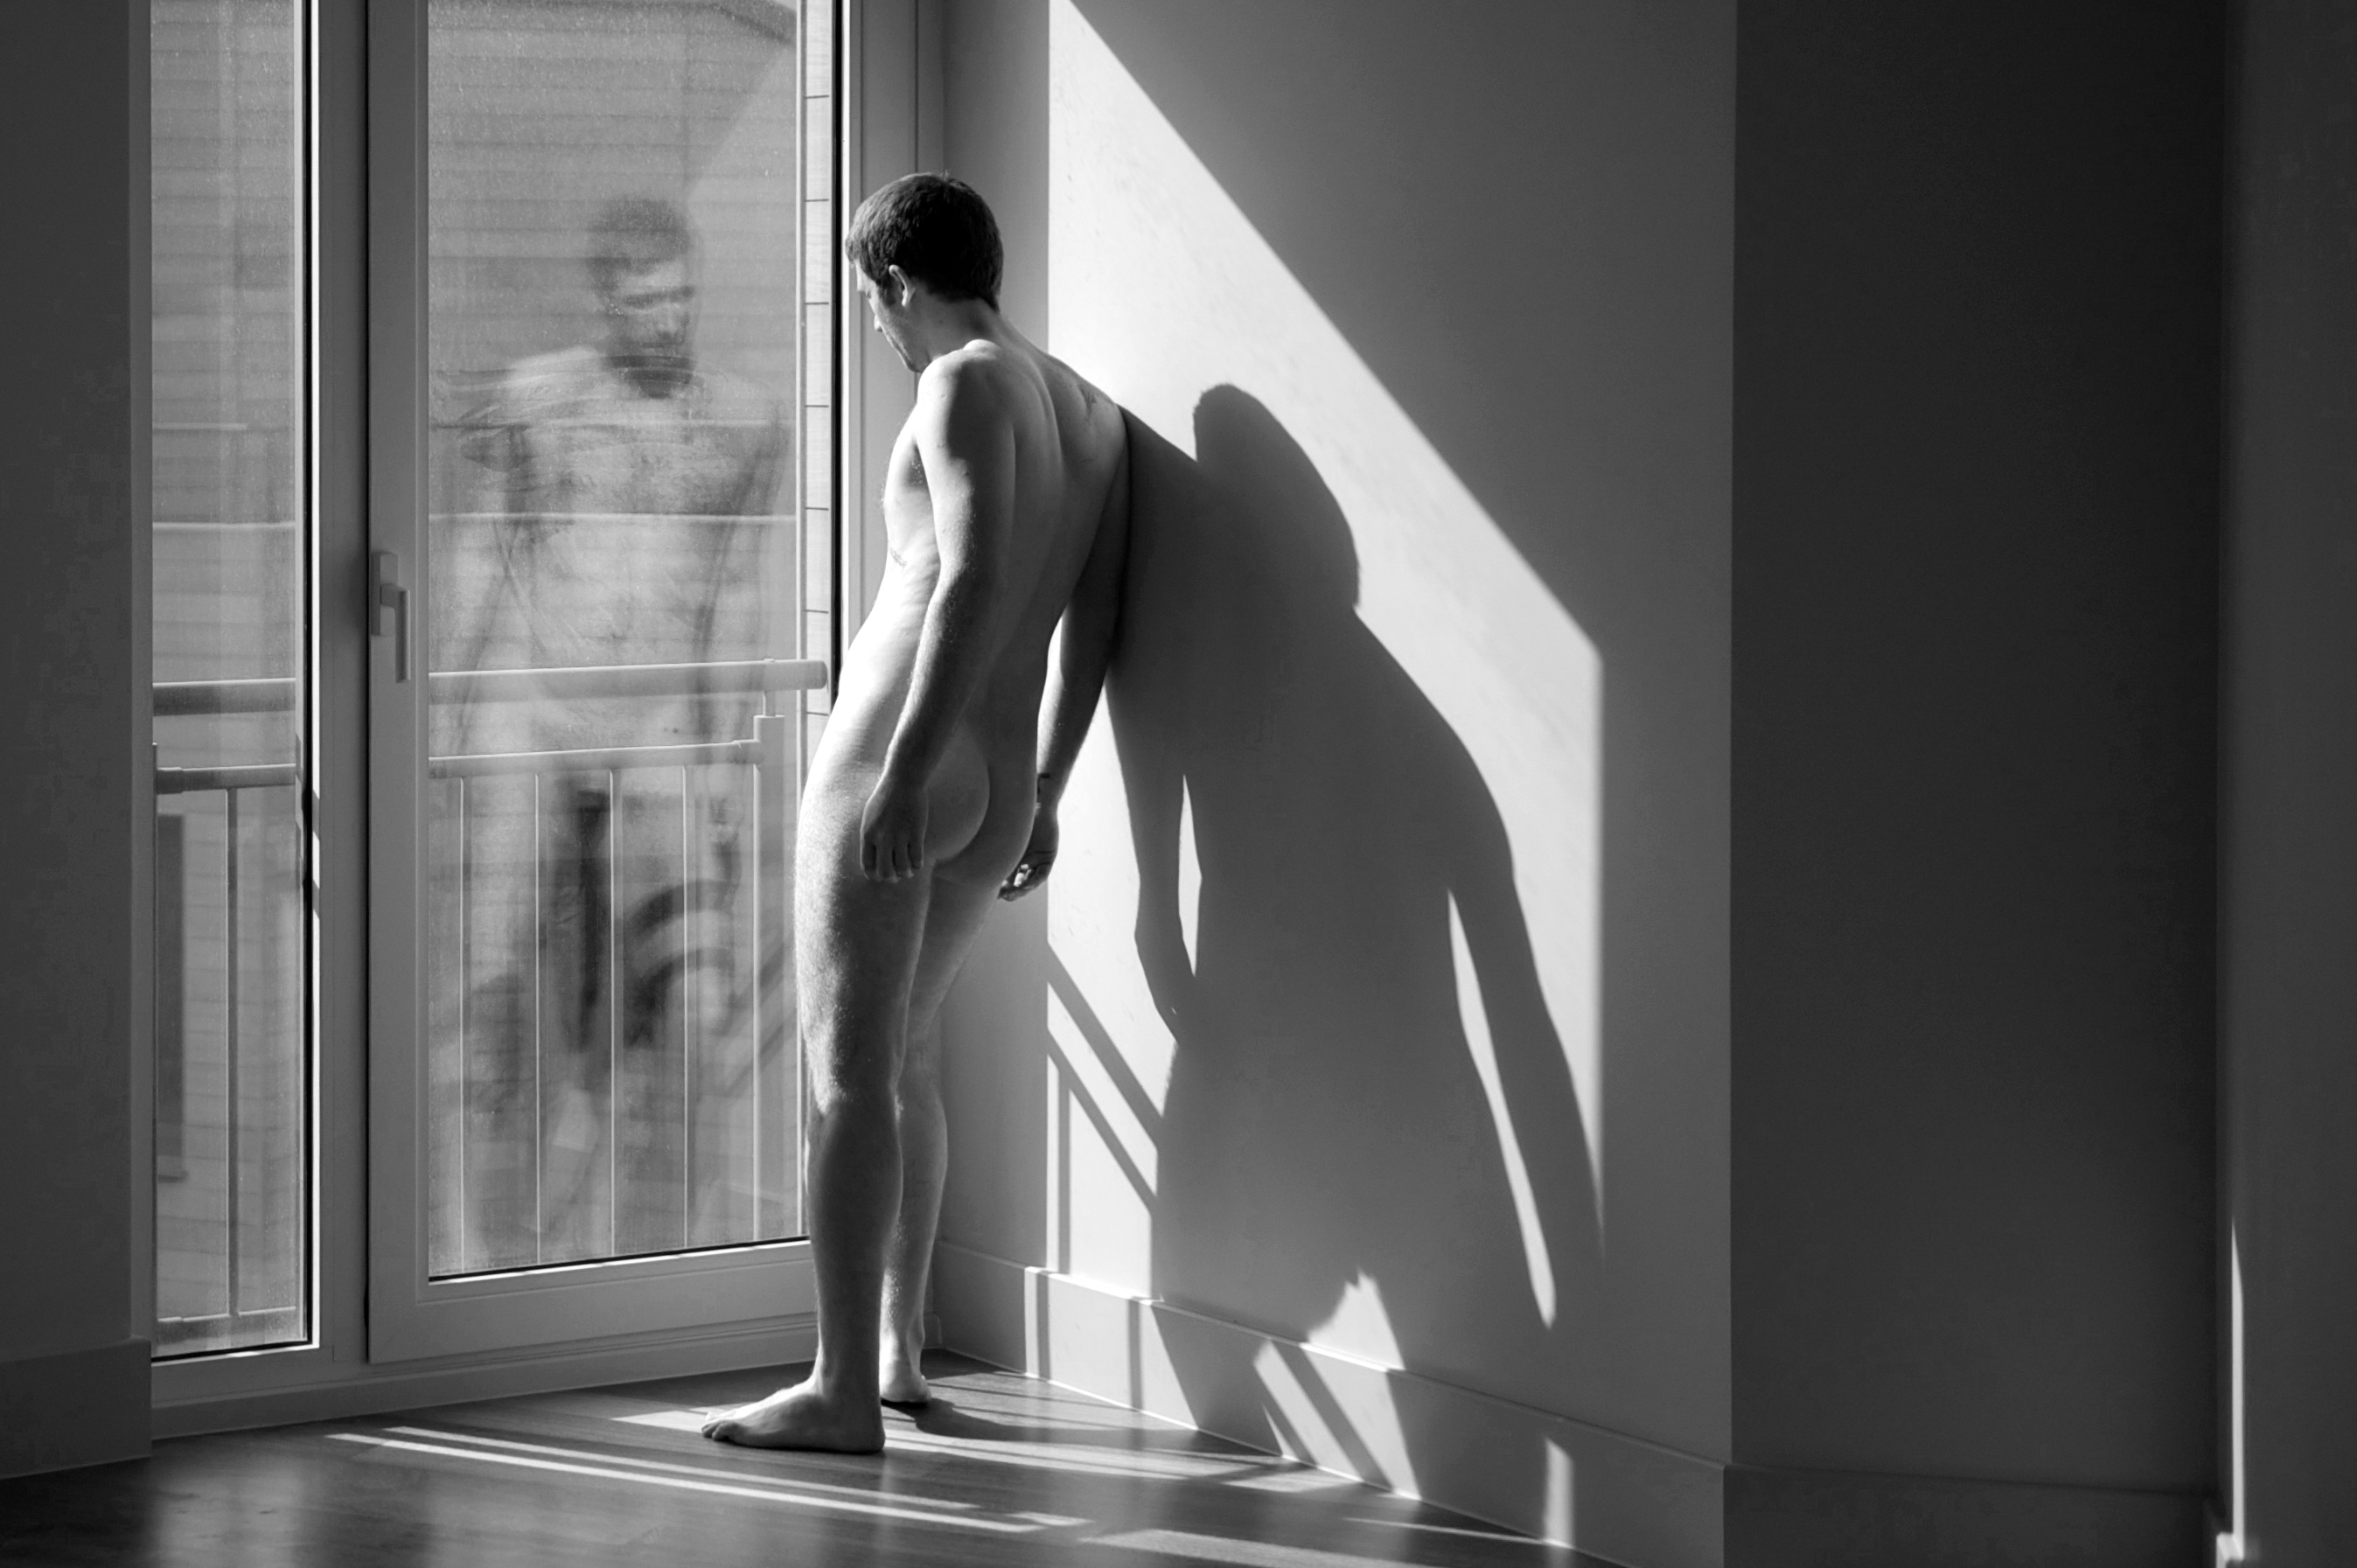 Naked by window light photograph by wolfgang madison.